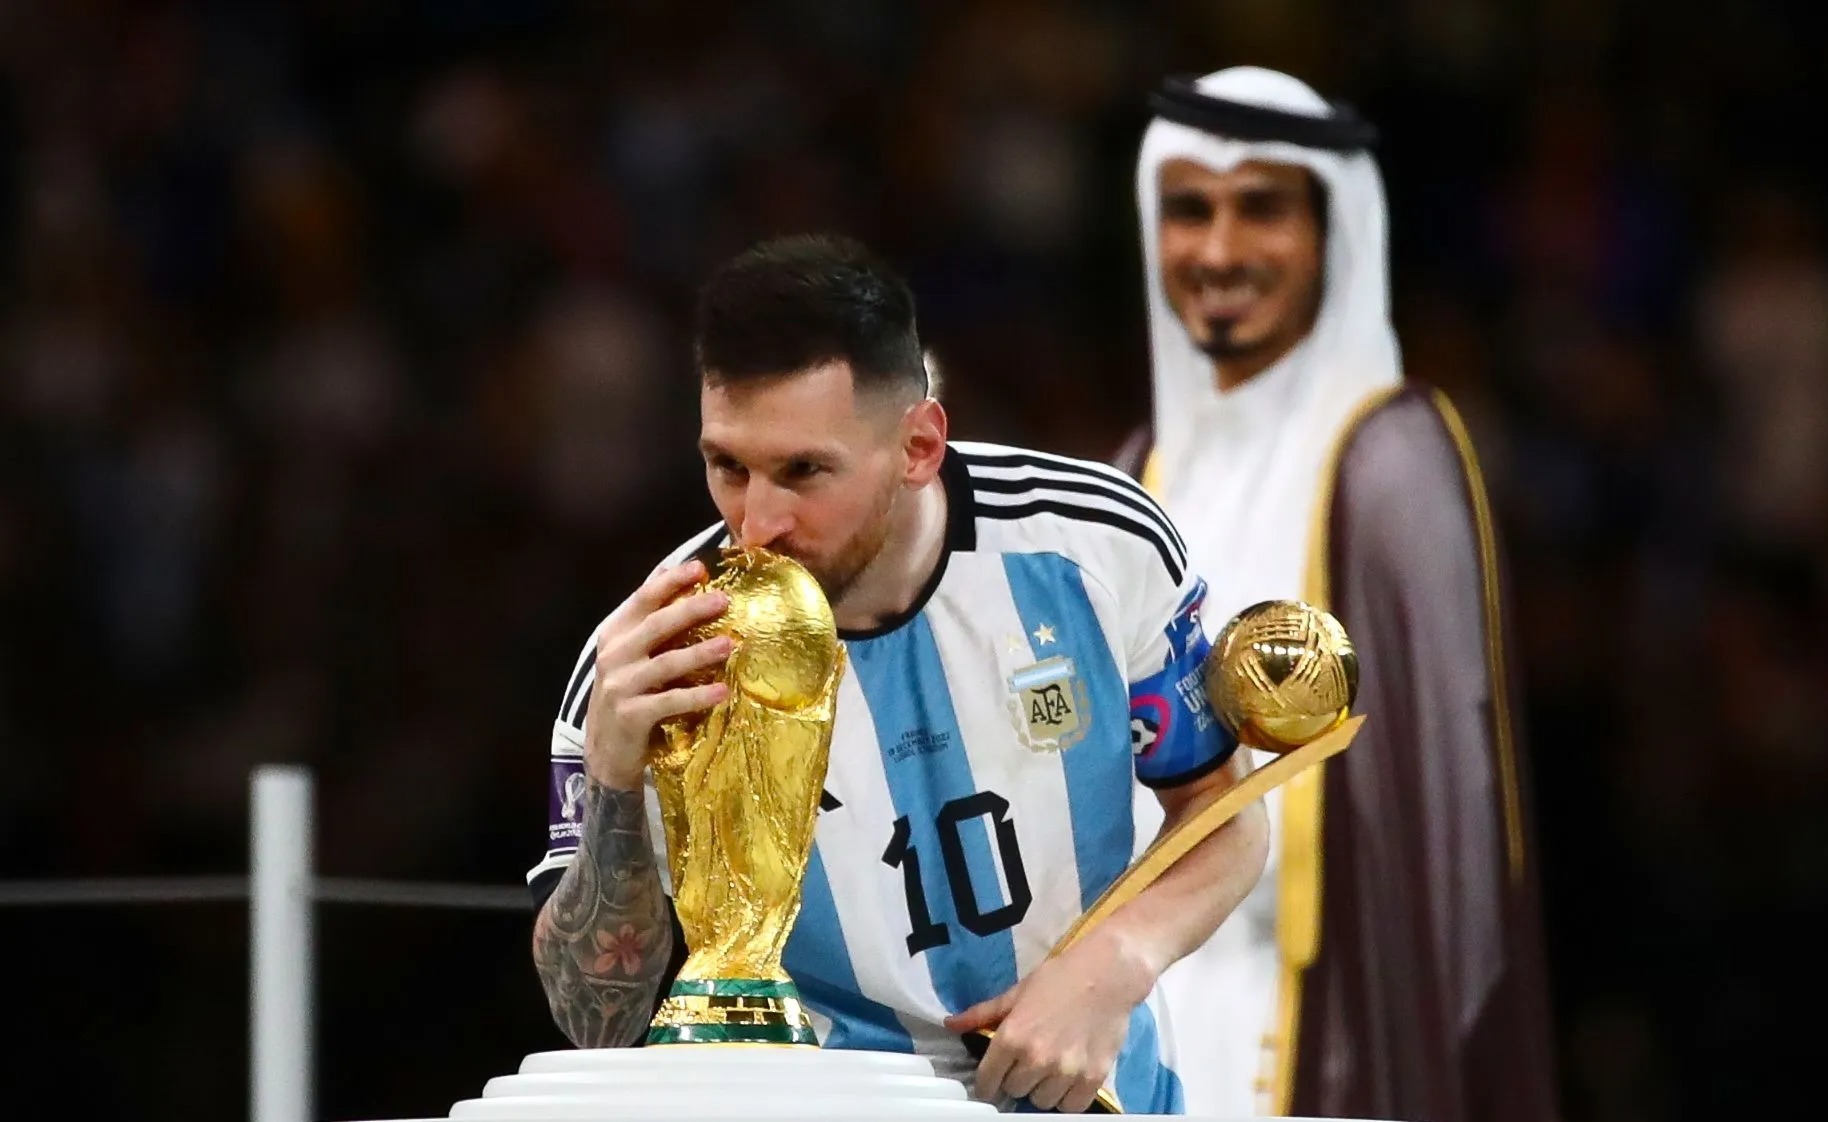 , Lionel Messi unknowingly lifted FAKE World Cup trophy in record Instagram post that beat ‘The Egg’